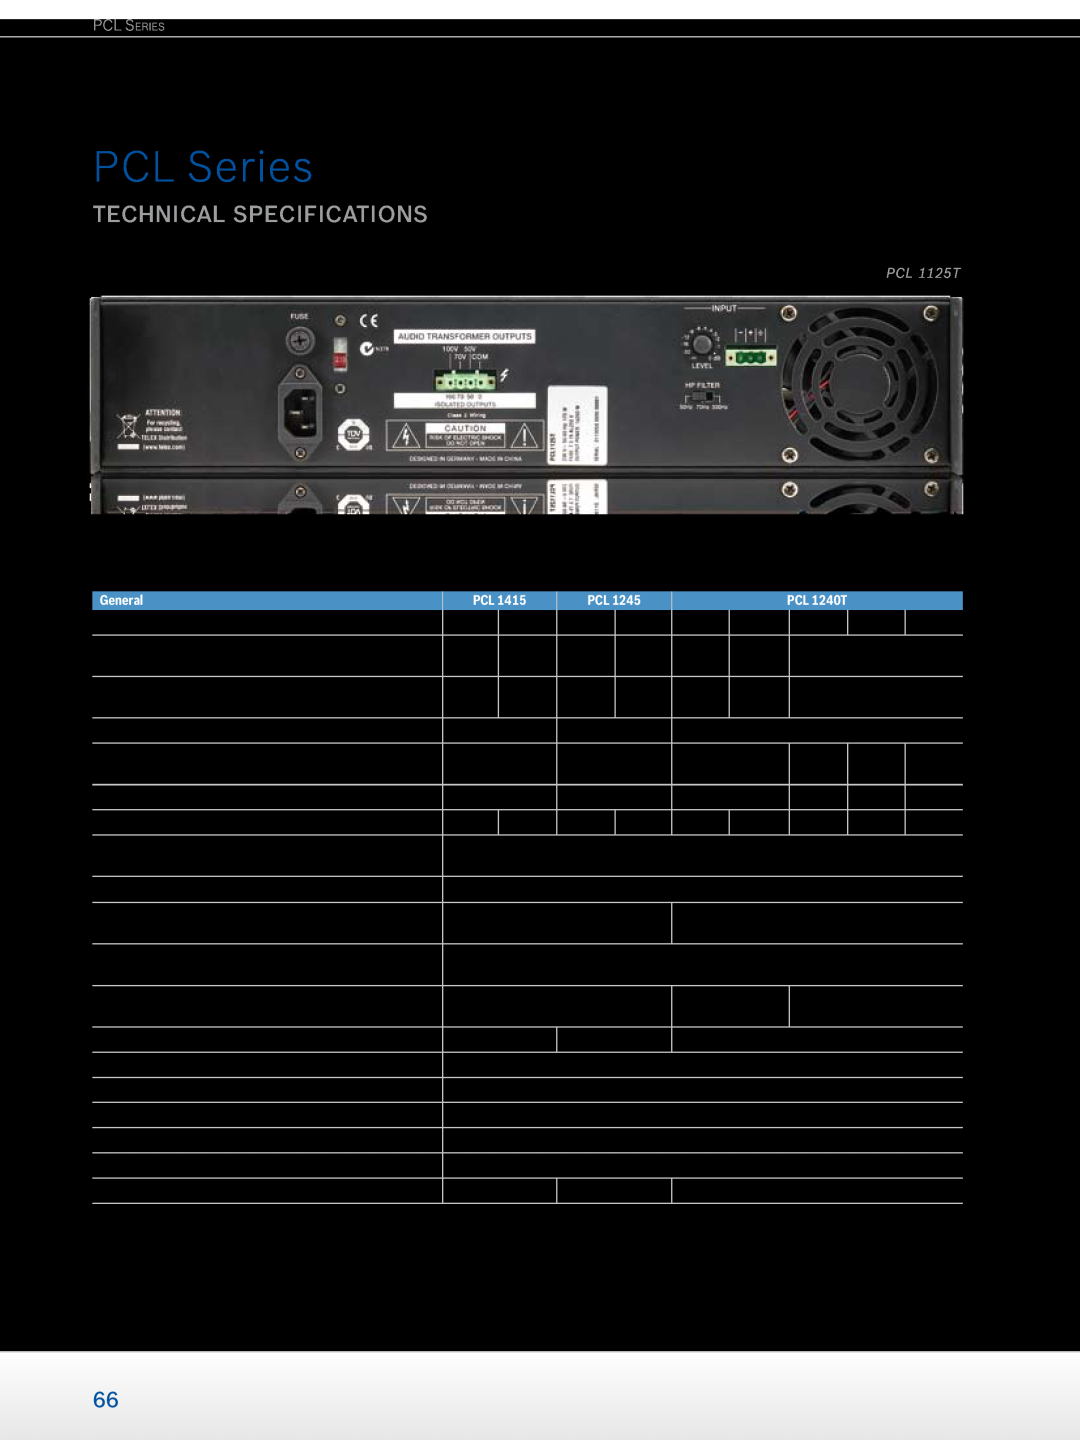 Dynacord Professional Power Amplifiers manual PCL Series, technical specifications, General 